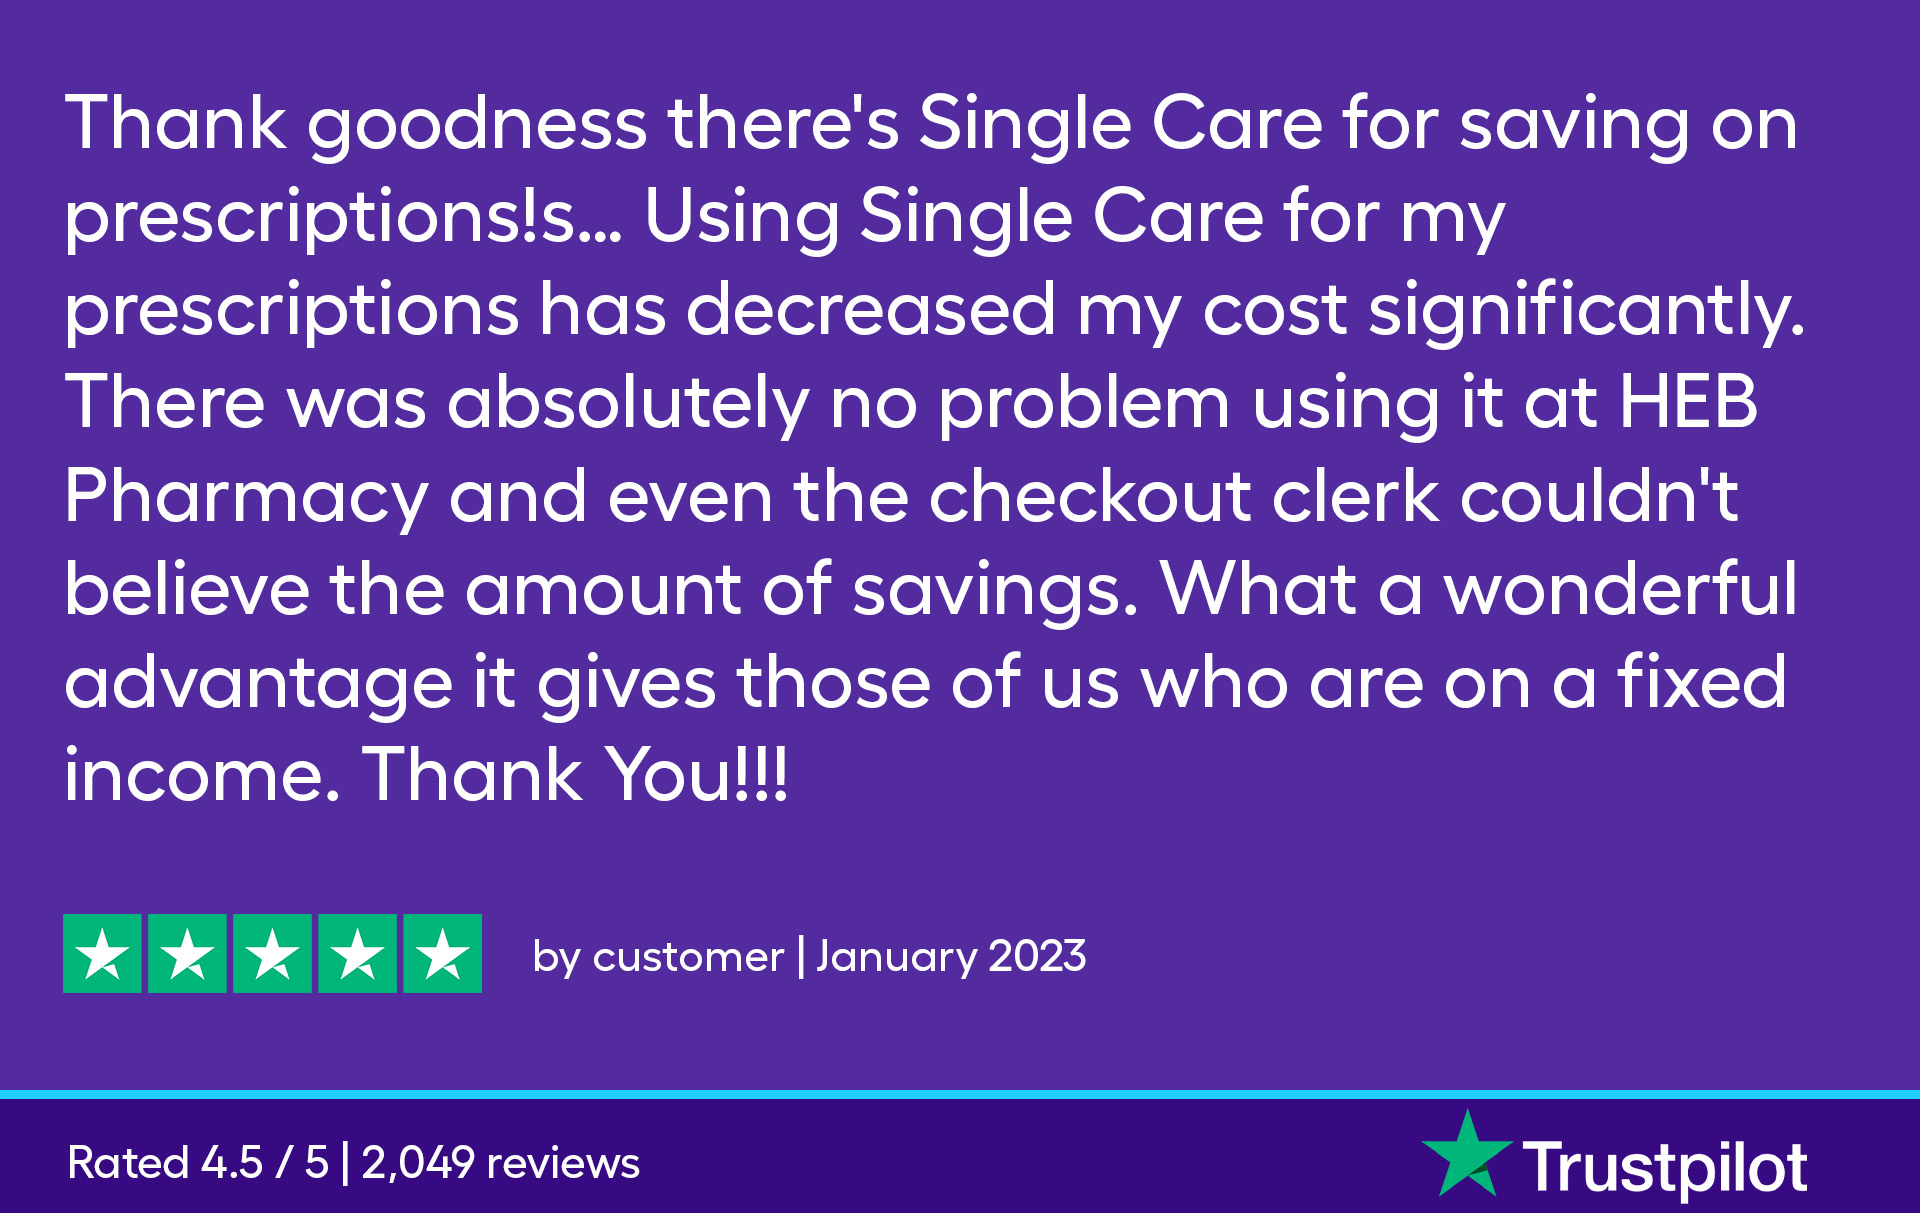 Thank goodness there's SingleCare for saving on prescriptions! Using SingleCare for my prescriptions has decreased my cost significantly. There was absolutely no problem using it at HEB pharmacy even the checkout clerk couldn't believe the amount of savings. What a wonderful advantage it gives those of us who are on a fixed income. Thank You!!!!